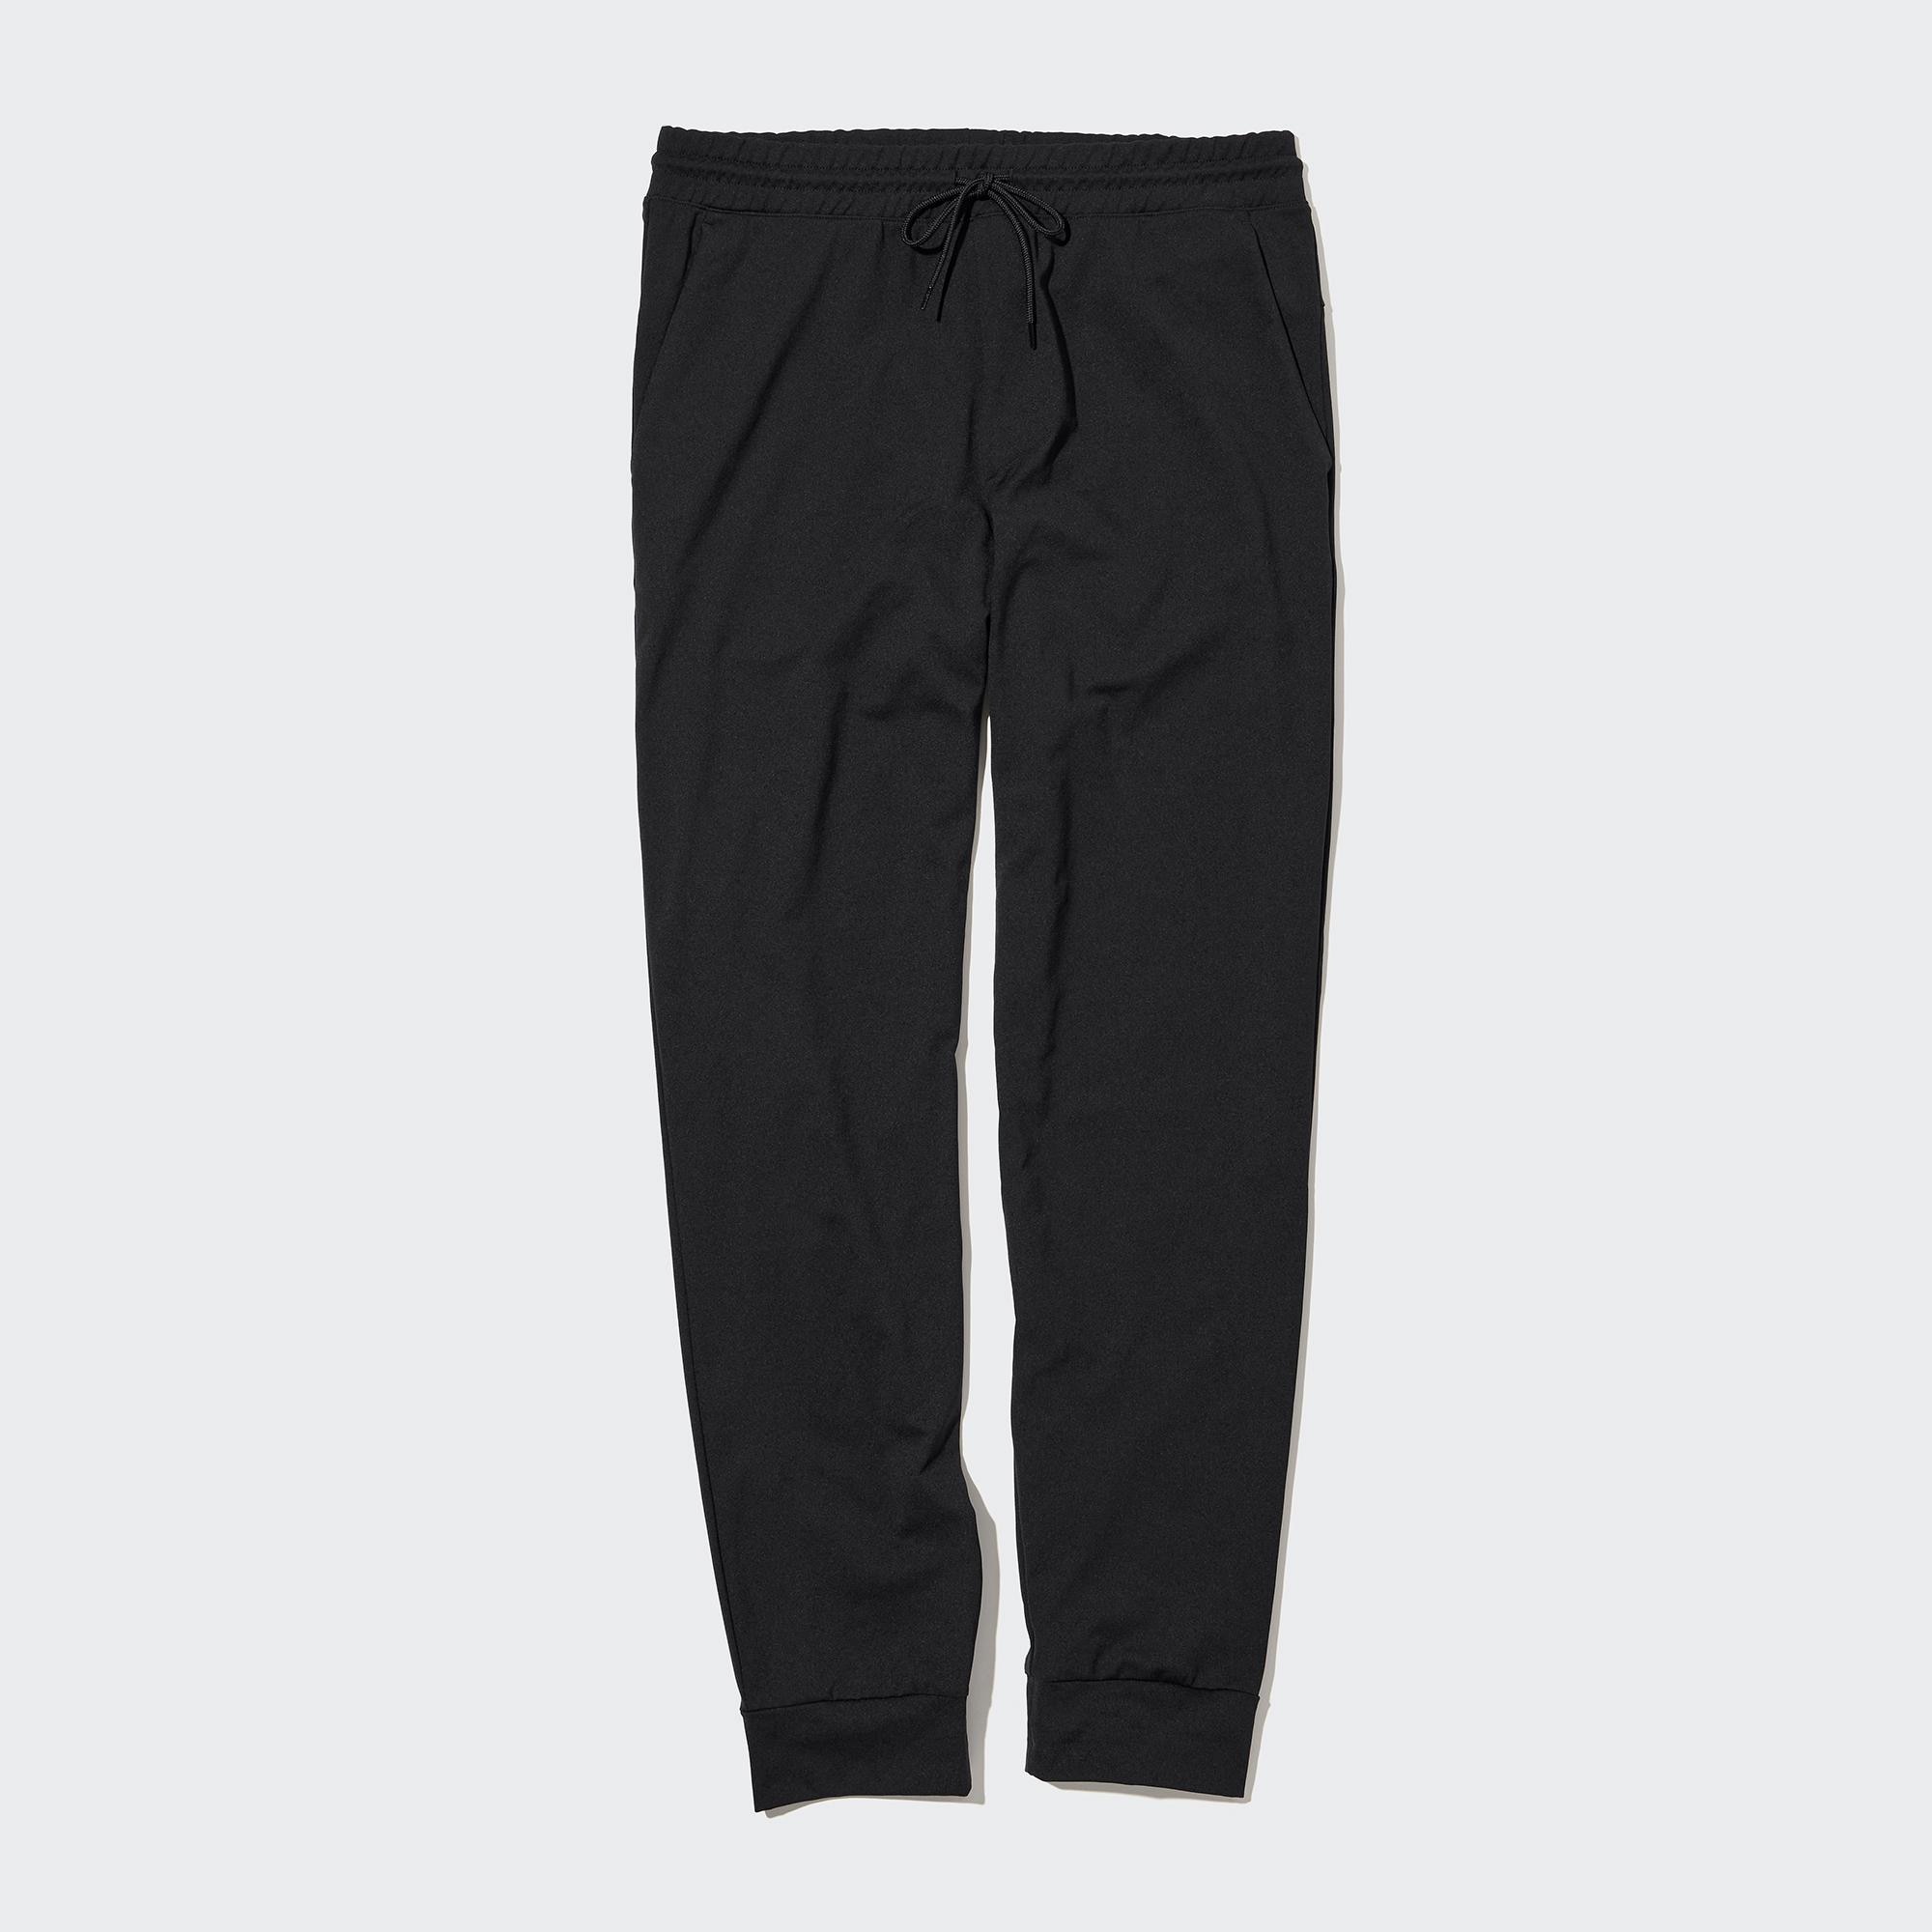 Uniqlo Philippines - Style it with joggers! Our Ultra Stretch Jogger Pants  and Ponte Joggers are on limited offer. Both have gathered cuffs for easier  movement and a slender silhouette. Also features